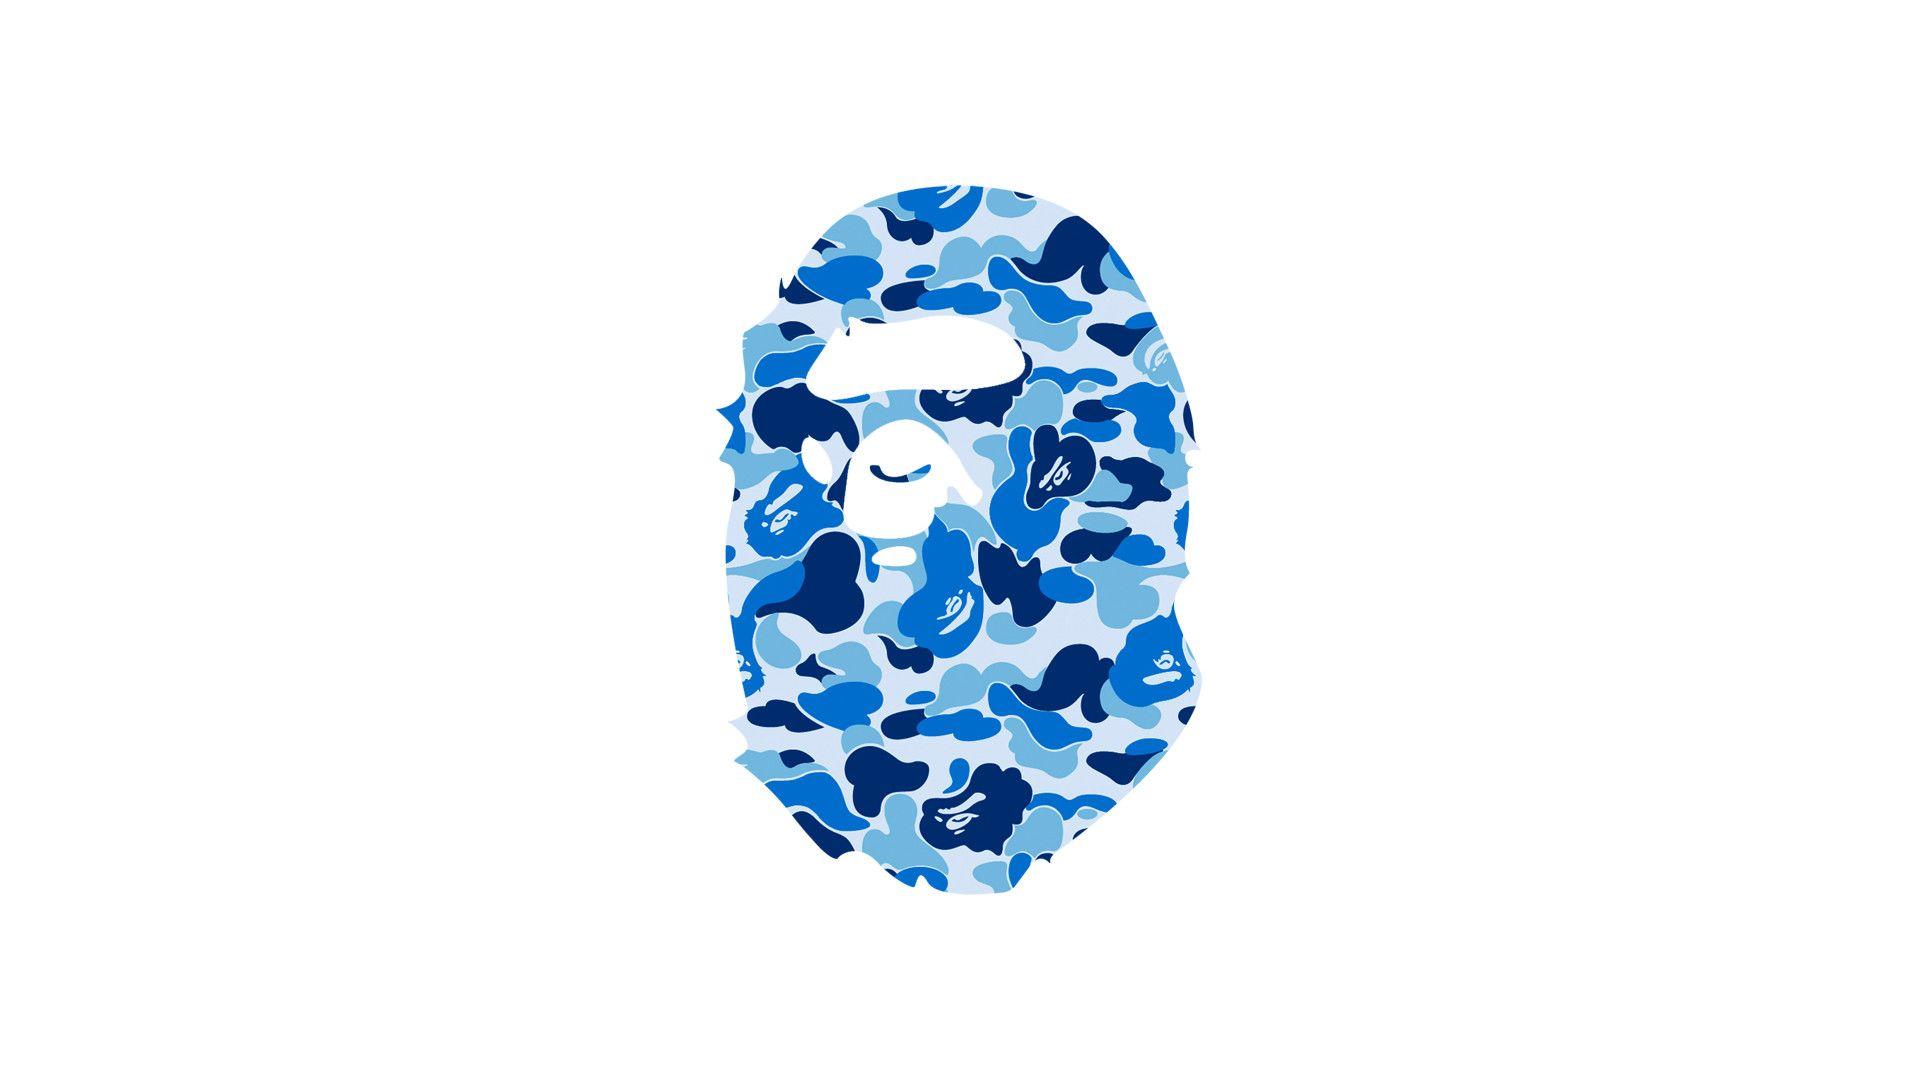 Bape Wallpaper Red And Blue - 1080p 4k Hd Wallpapers For Iphone 6 Bape